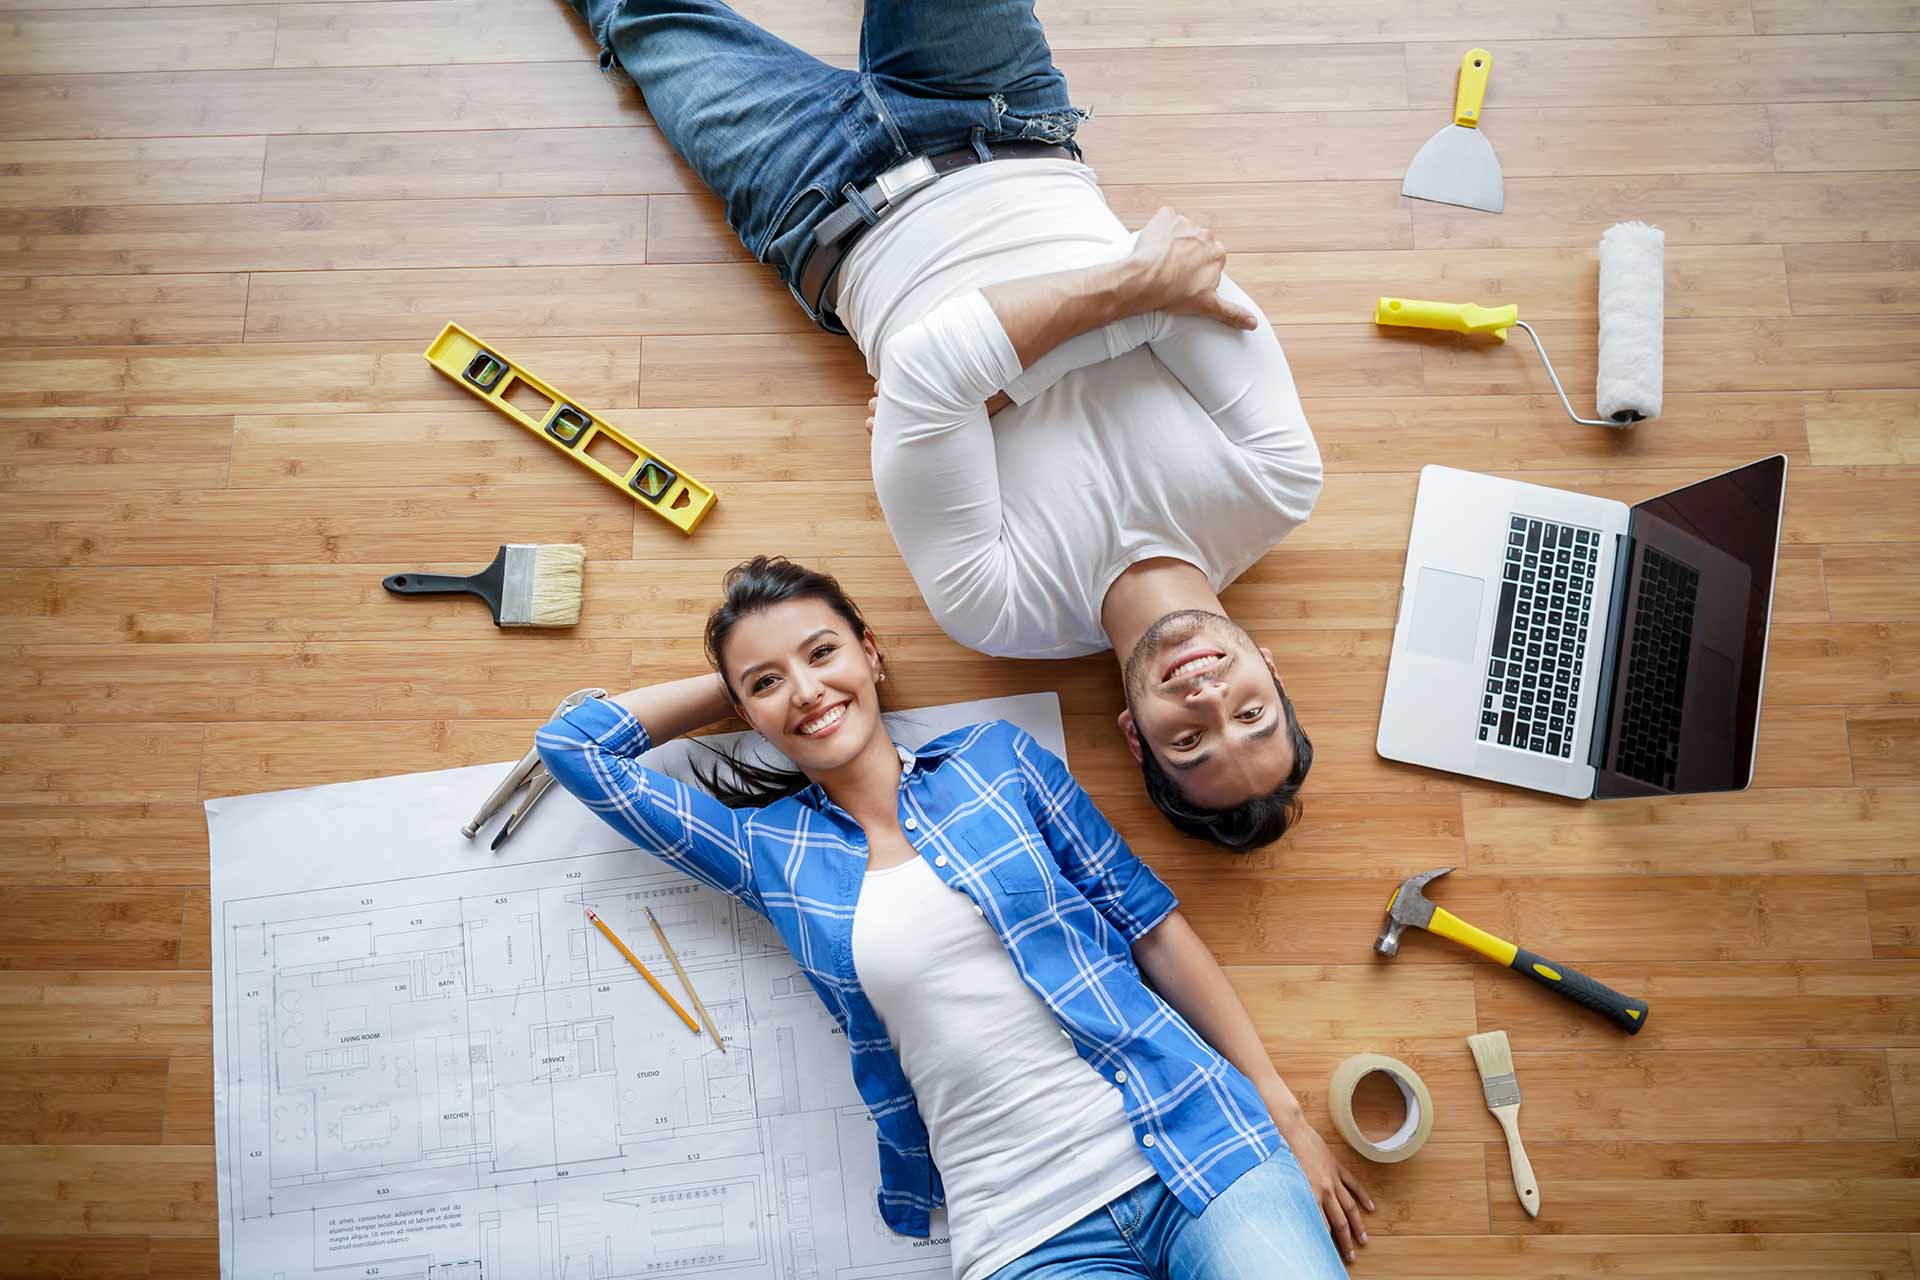 invest-your-tax-refund-in-home-improvements-elite-renovations